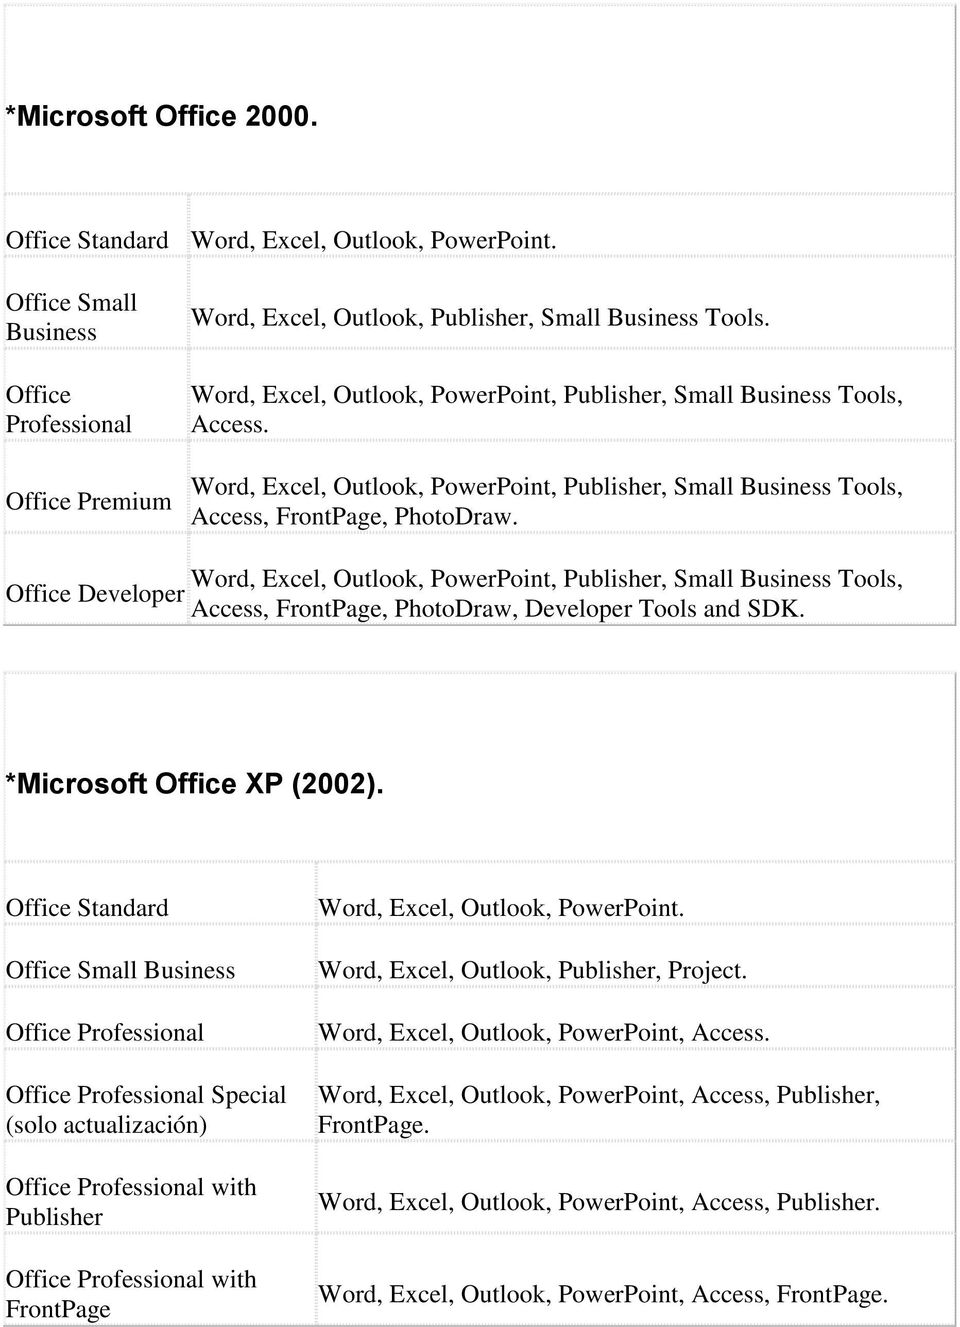 Office Developer Word, Excel, Outlook, PowerPoint, Publisher, Small Business Tools, Access, FrontPage, PhotoDraw, Developer Tools and SDK. *Microsoft Office XP (2002).